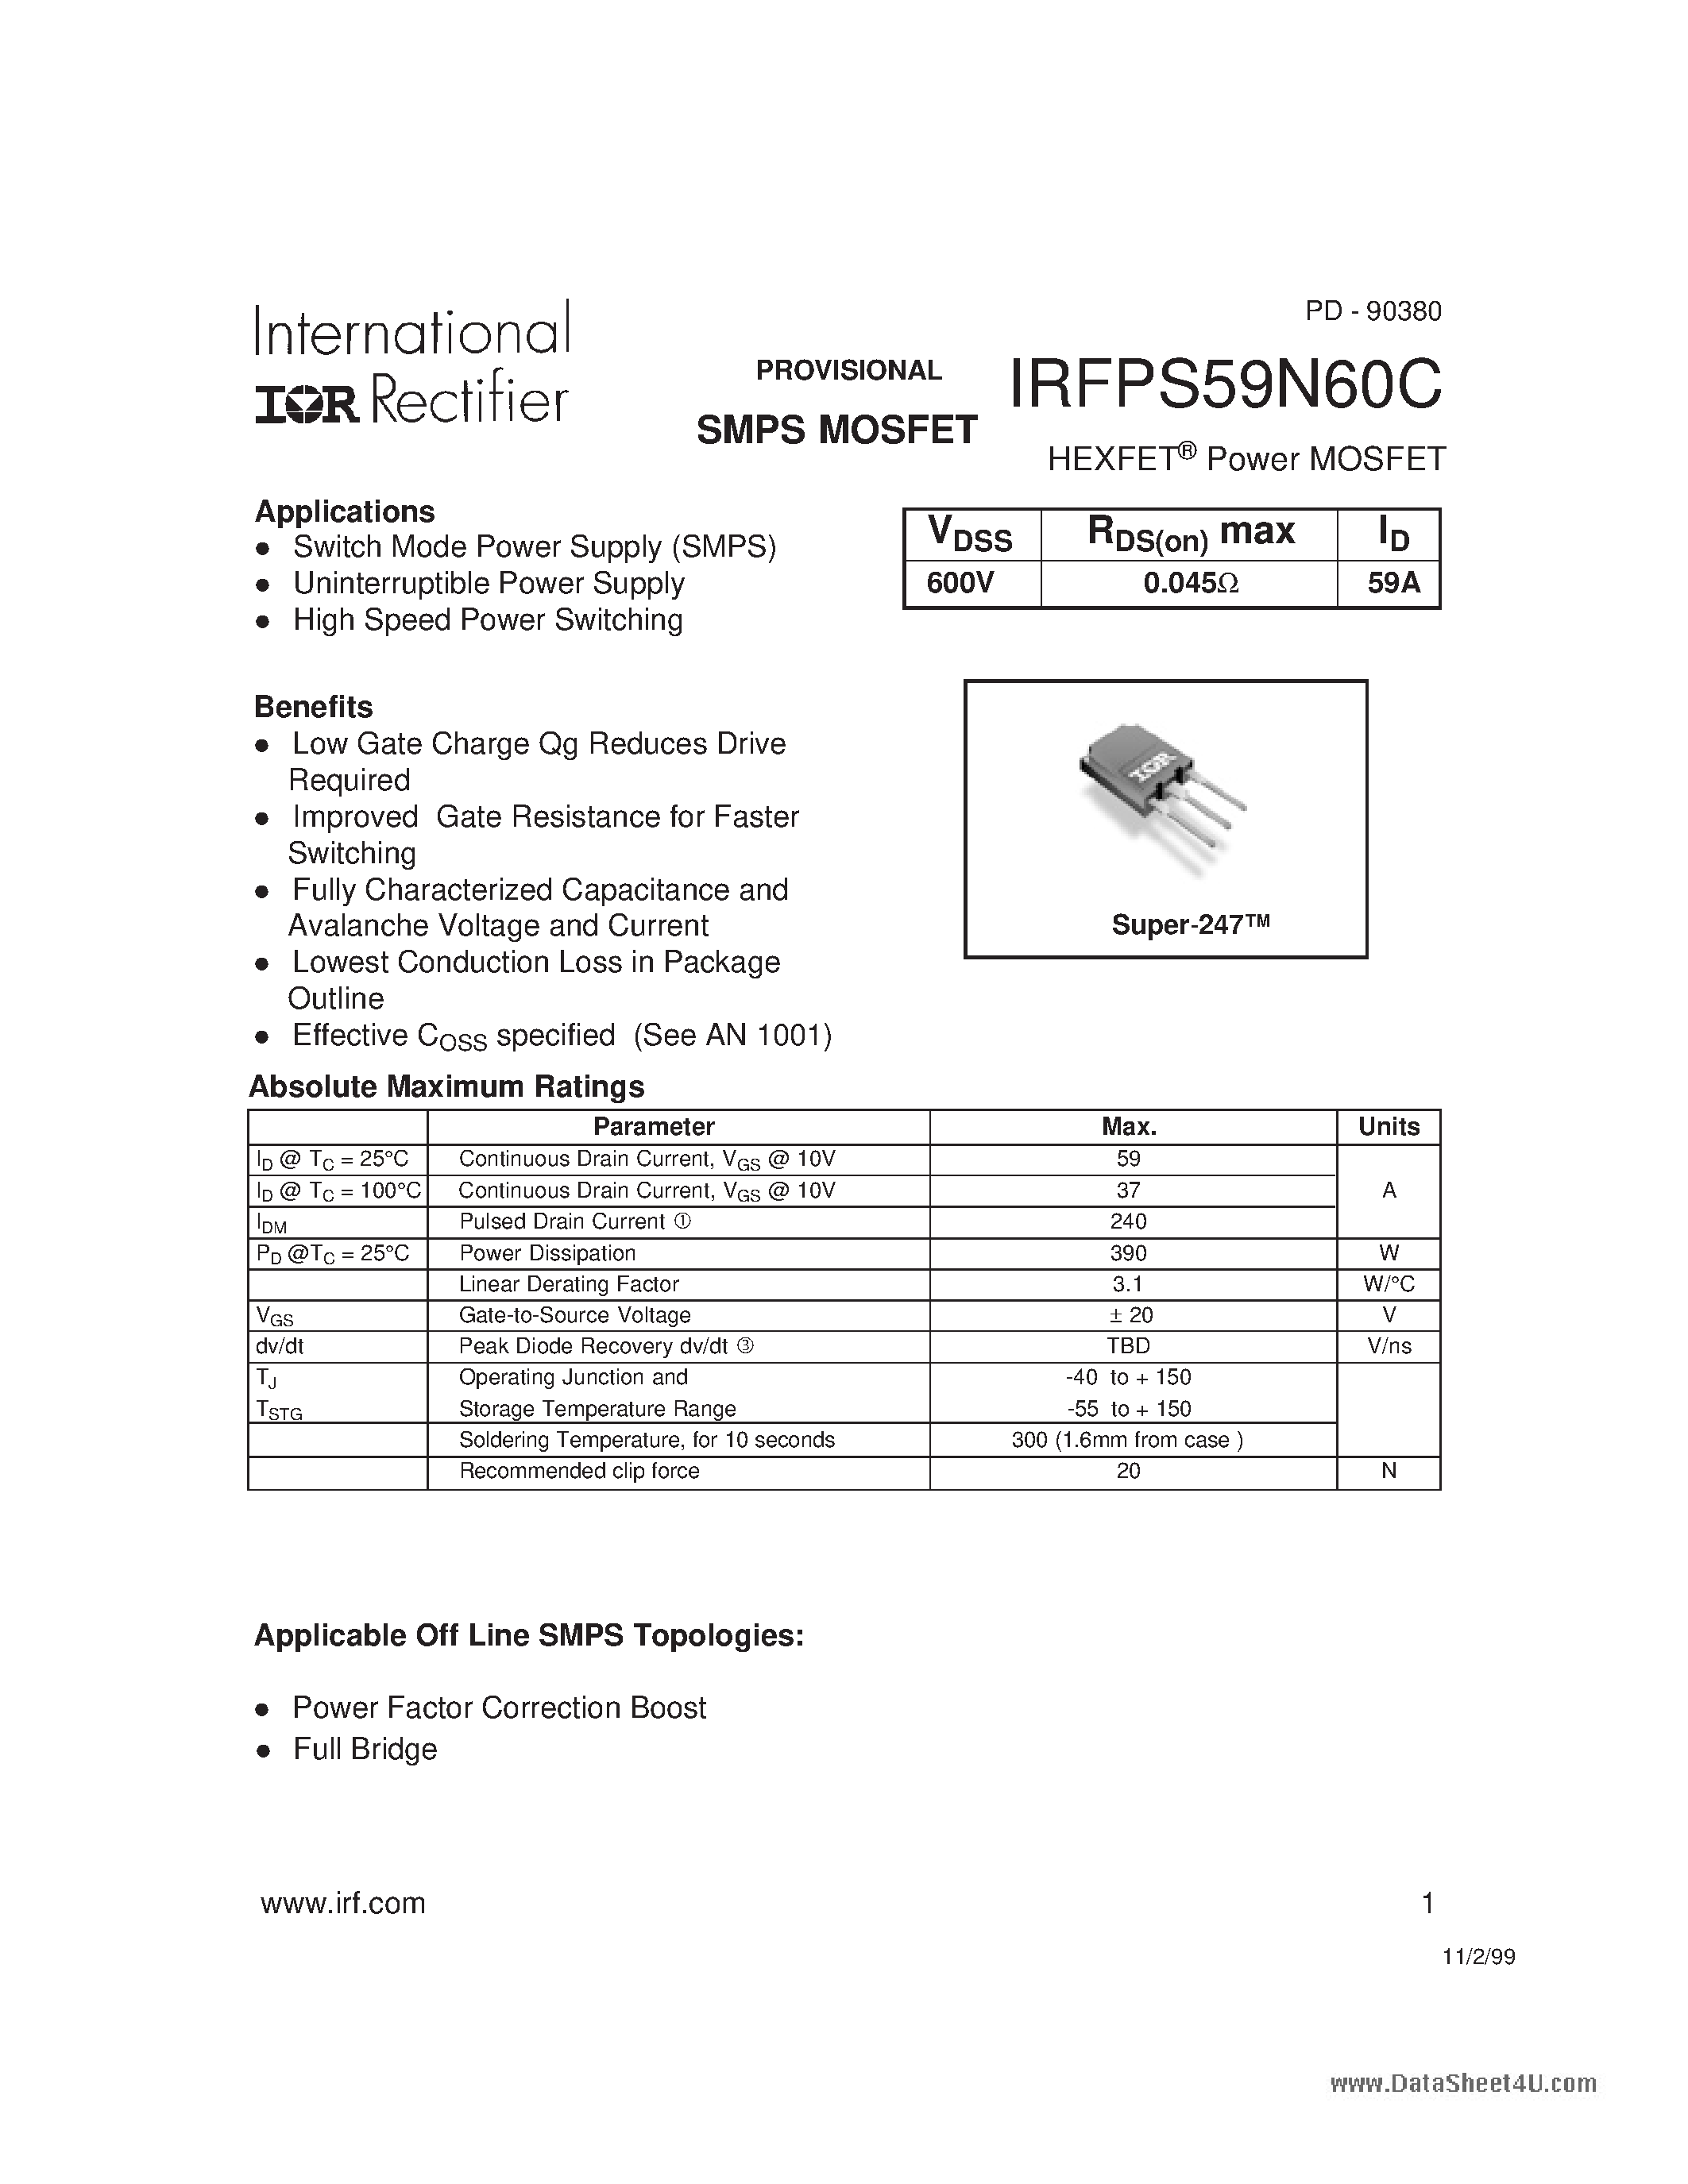 Даташит IRFPS59N60C - HEXFET Power MOSFET страница 1